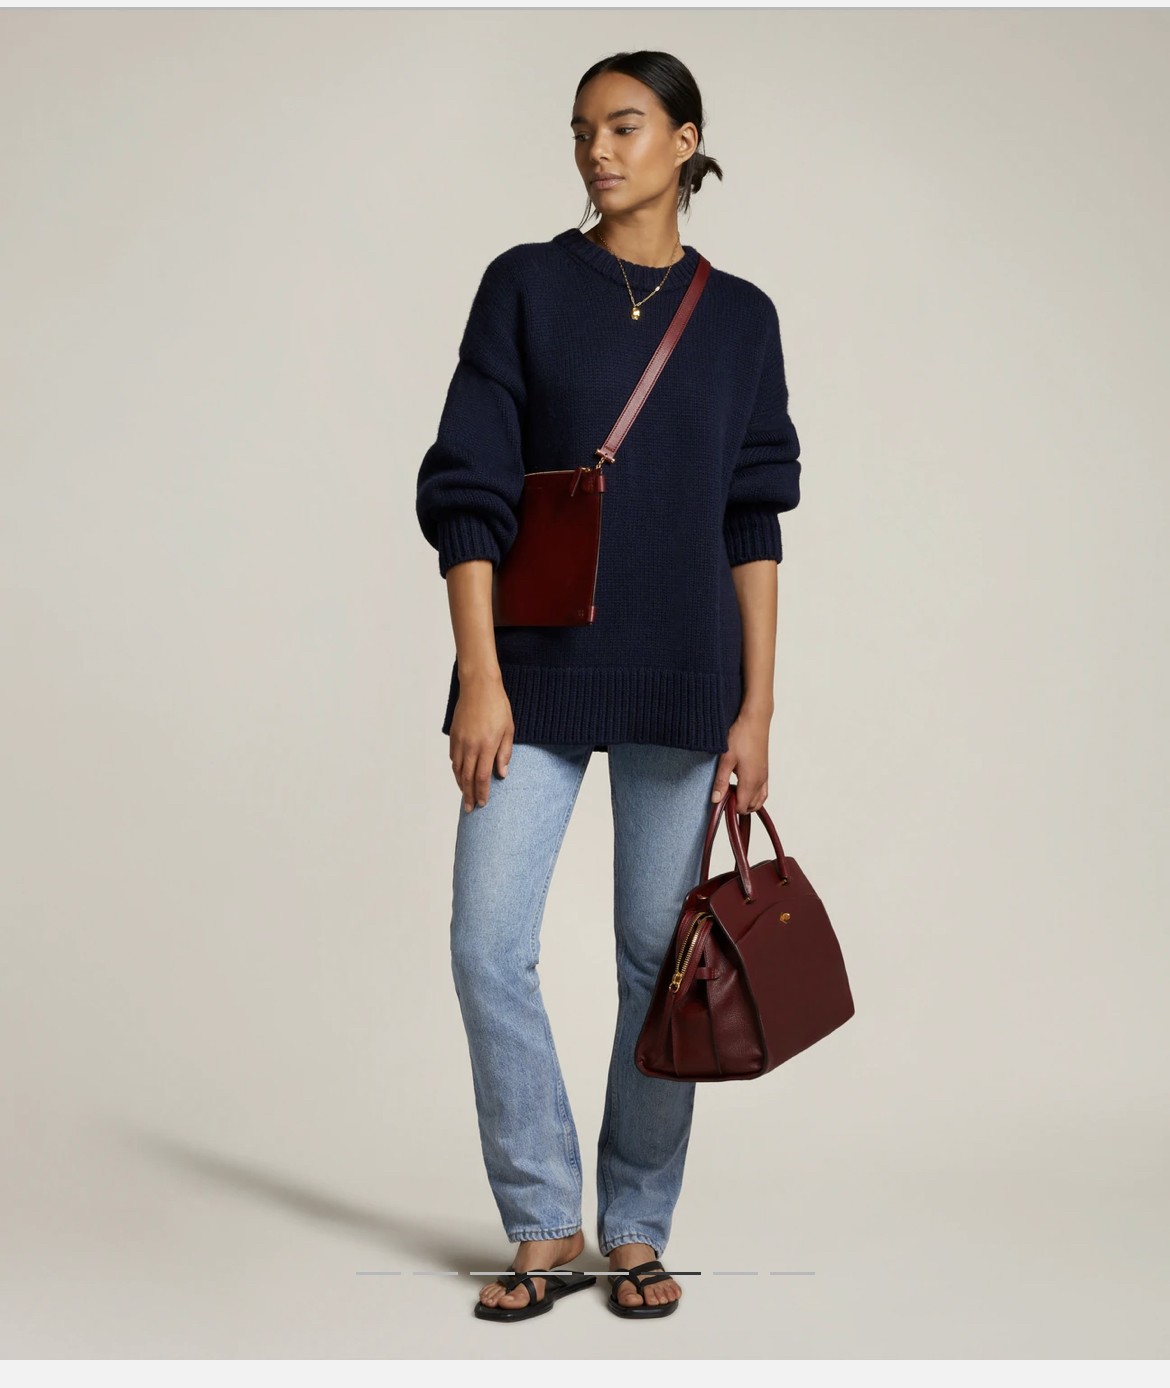 13 Bags That Will Fit All Your Fall Essentials - PurseBlog